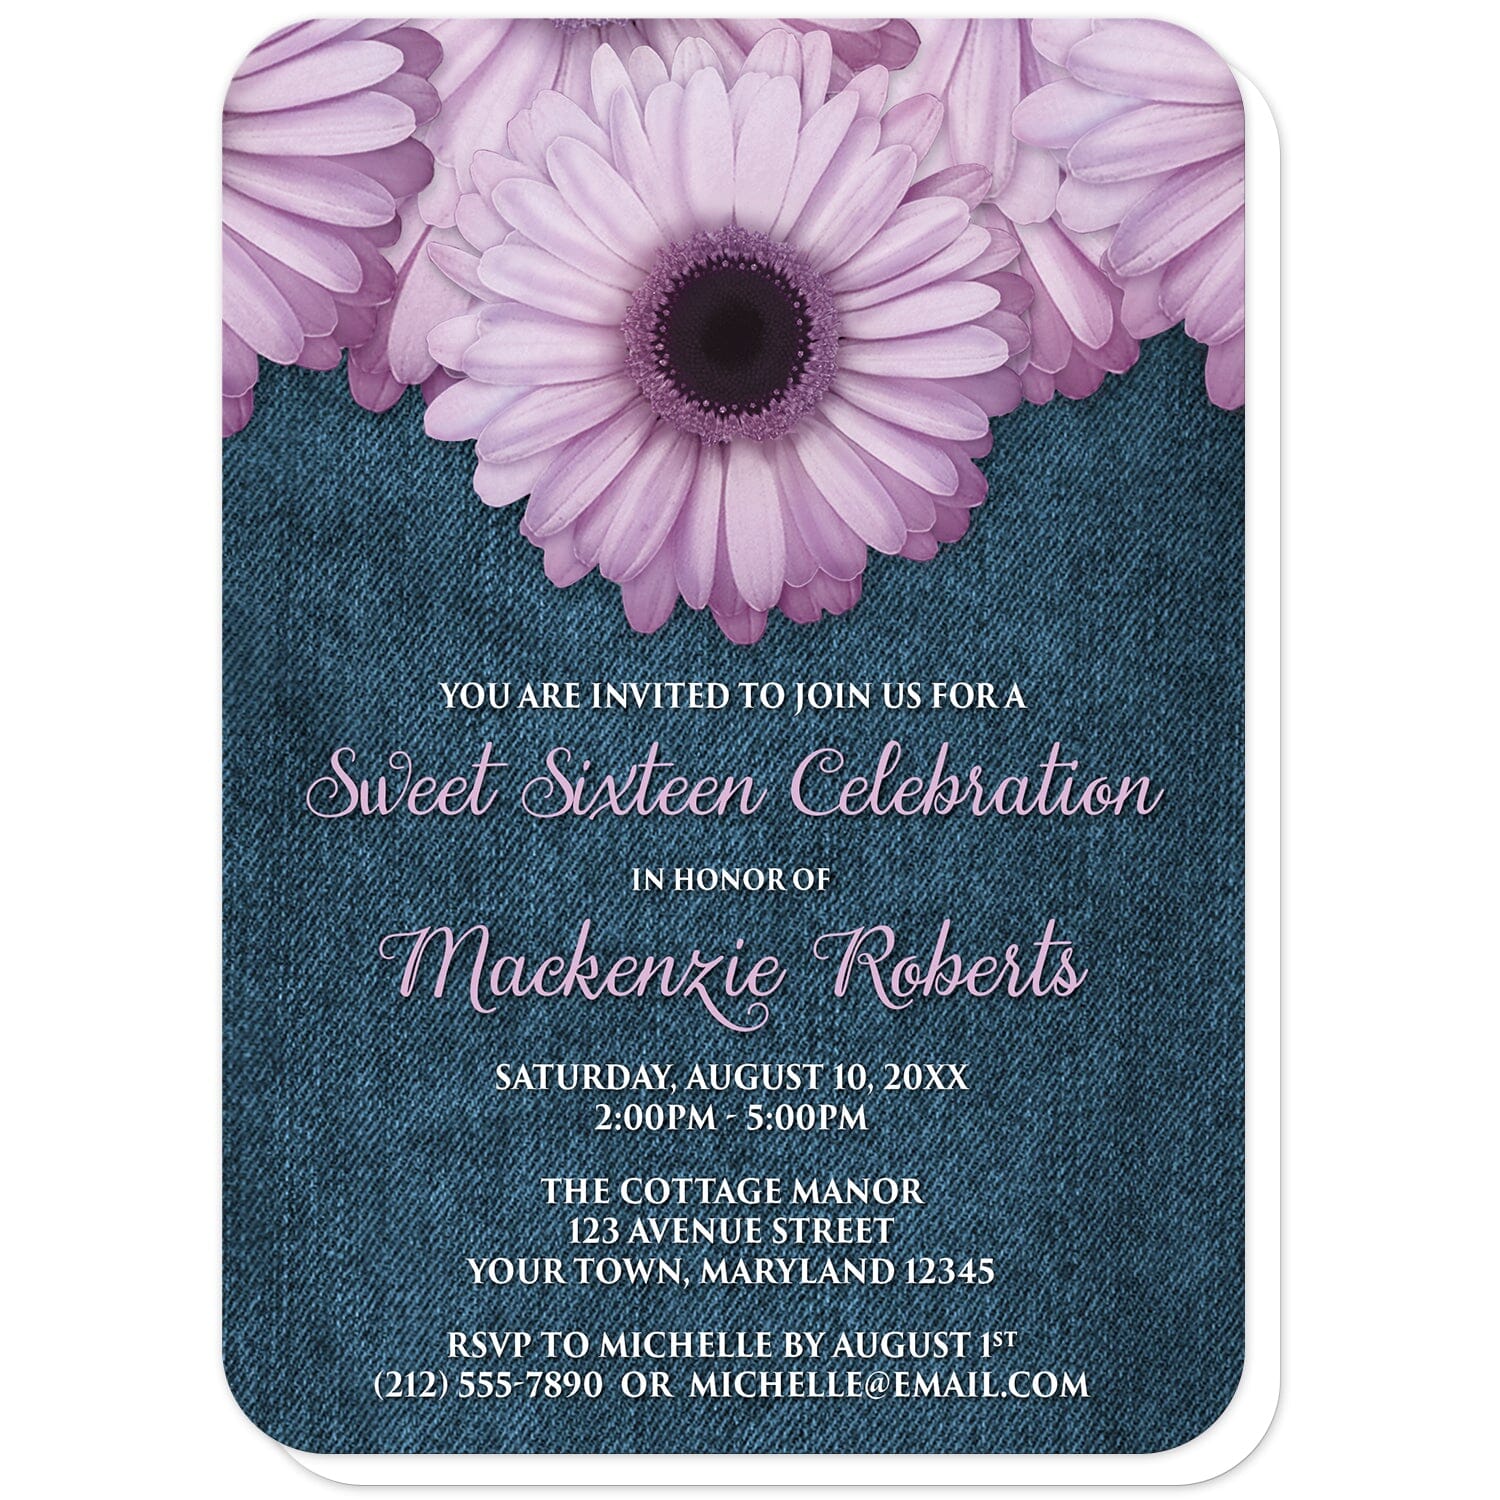 Rustic Purple Daisy Denim Sweet 16 Invitations (with rounded corners) at Artistically Invited. Rustic purple daisy denim sweet 16 invitations designed with large and lovely purple daisy flowers along the top over a country blue denim illustration. Your personalized sweet sixteen party details are custom printed in a whimsical purple script font for the name and occasion title and the remaining details are represented with an all-capital letters white font on the blue denim background. 